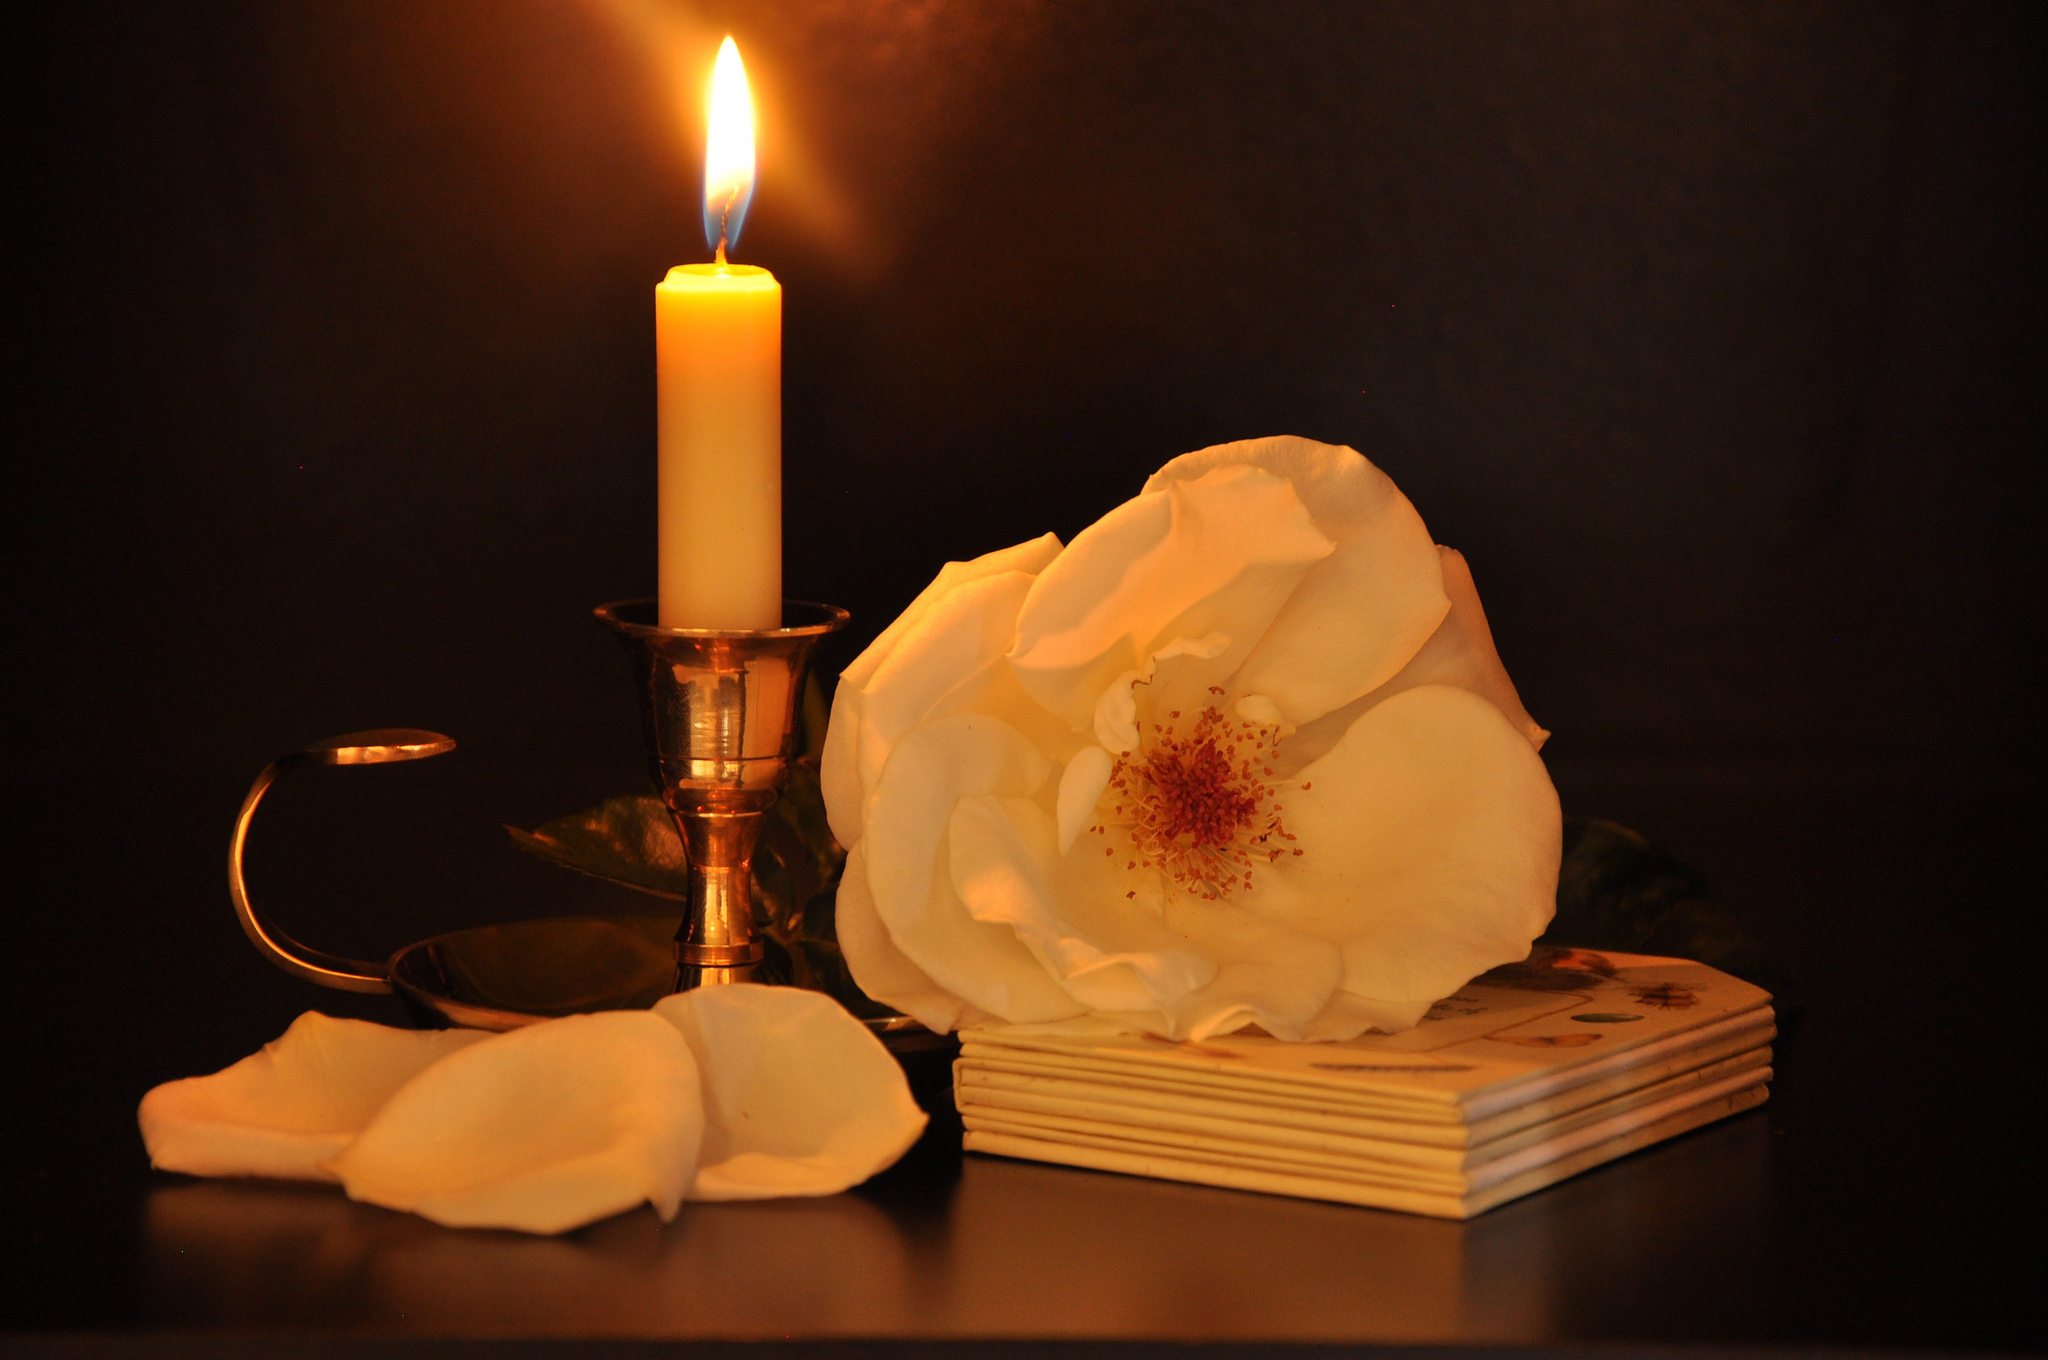 Candle HD Wallpaper | Background Image | 2048x1360 | ID ...